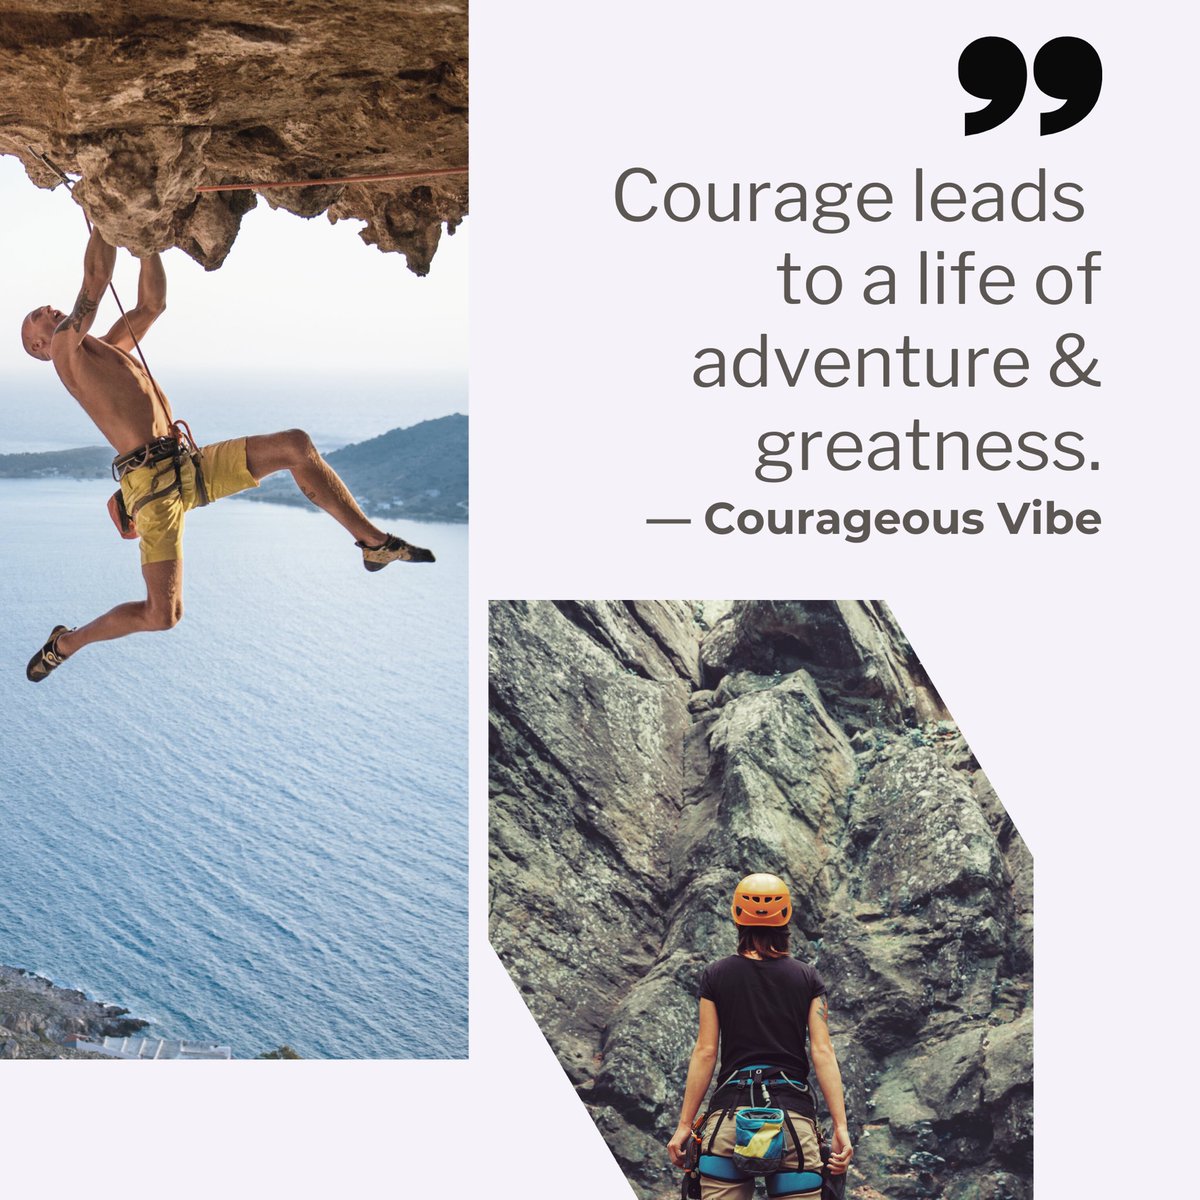 Courage leads to a life of adventure and greatness! 

#courageous #courageousquotes #adventure #greatness #courageousvibe #brave #rockclimbing